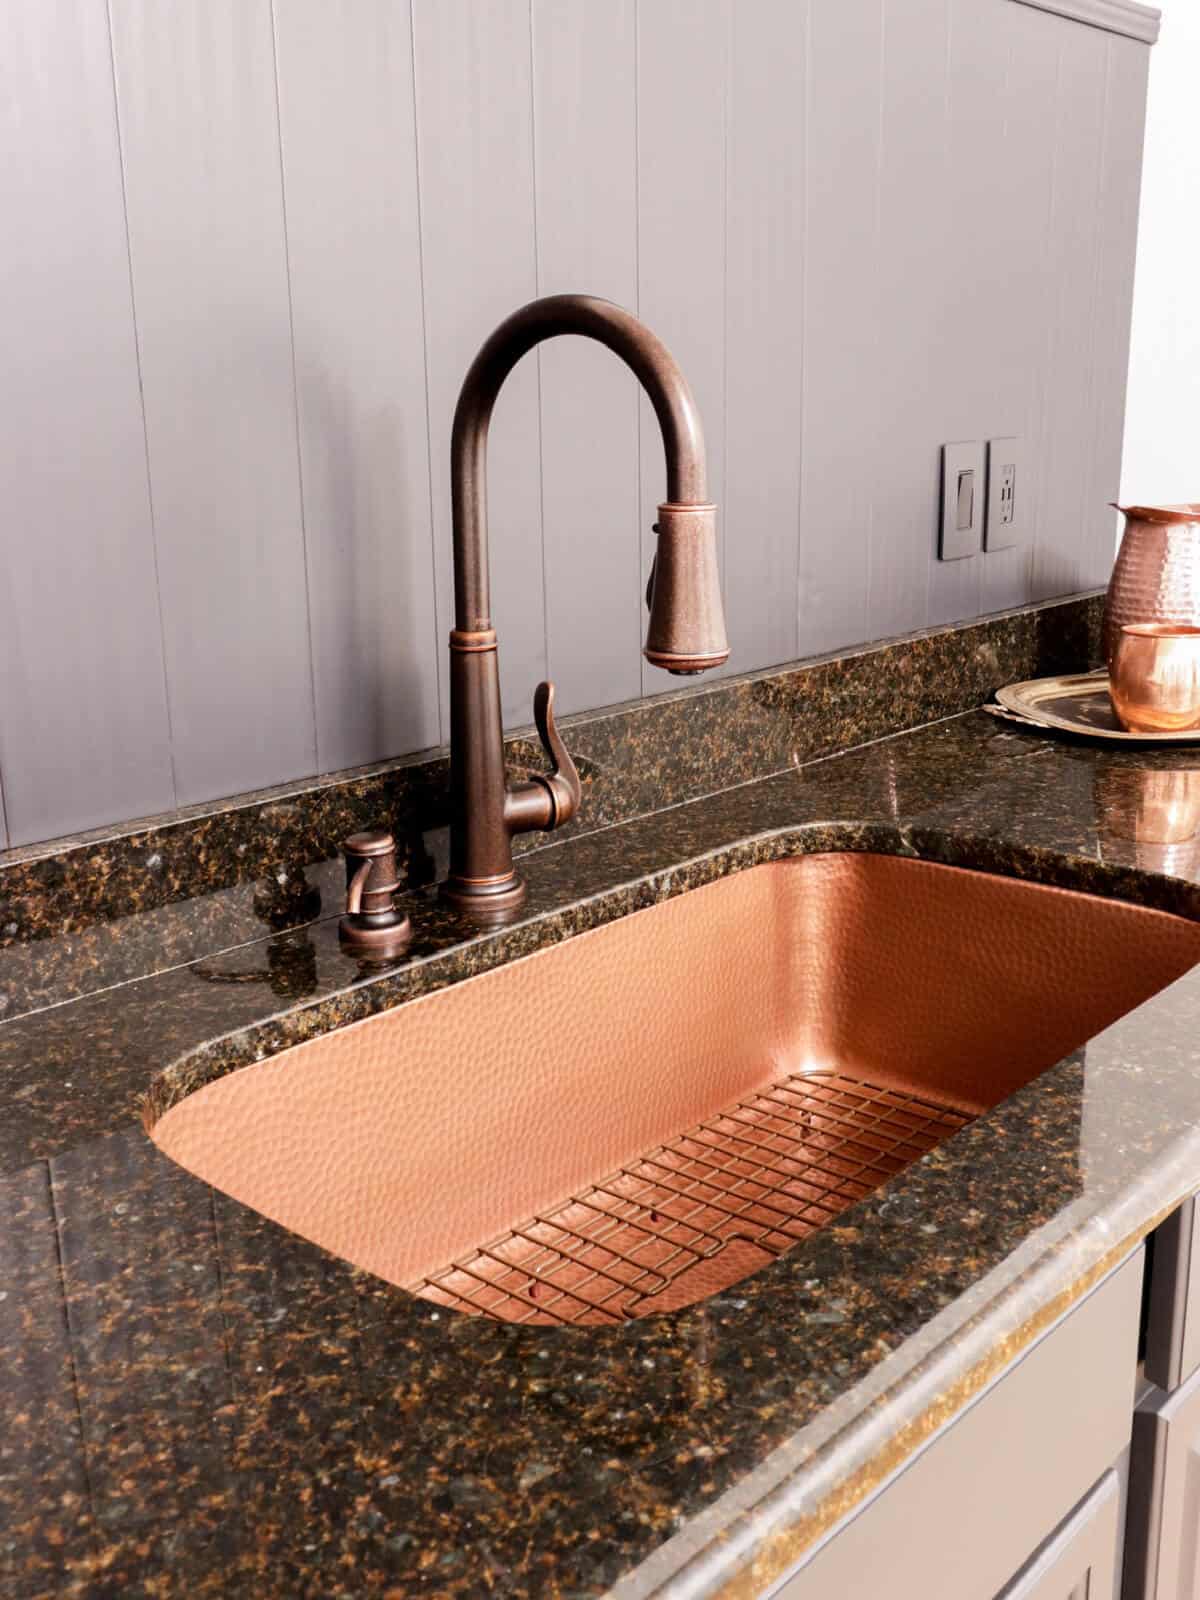 How to Replace an Undermount Sink